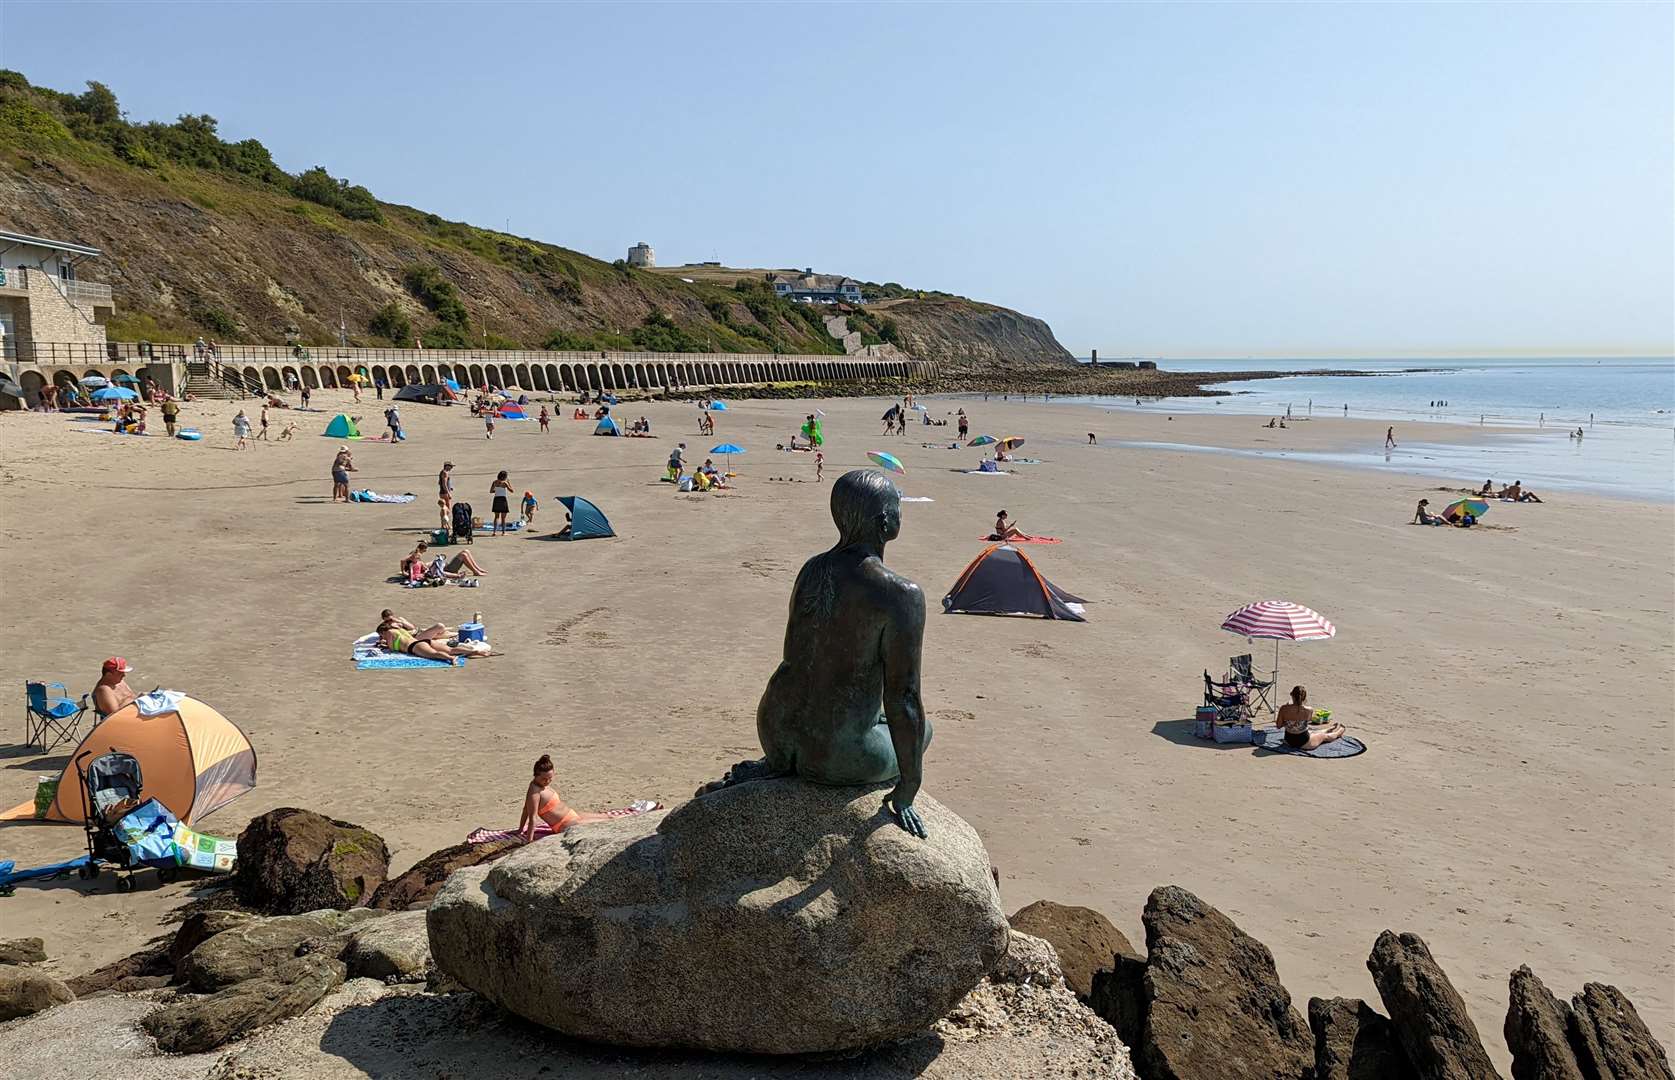 Sunny Sands in Folkestone offers something Brighton’s beaches can’t… sand!